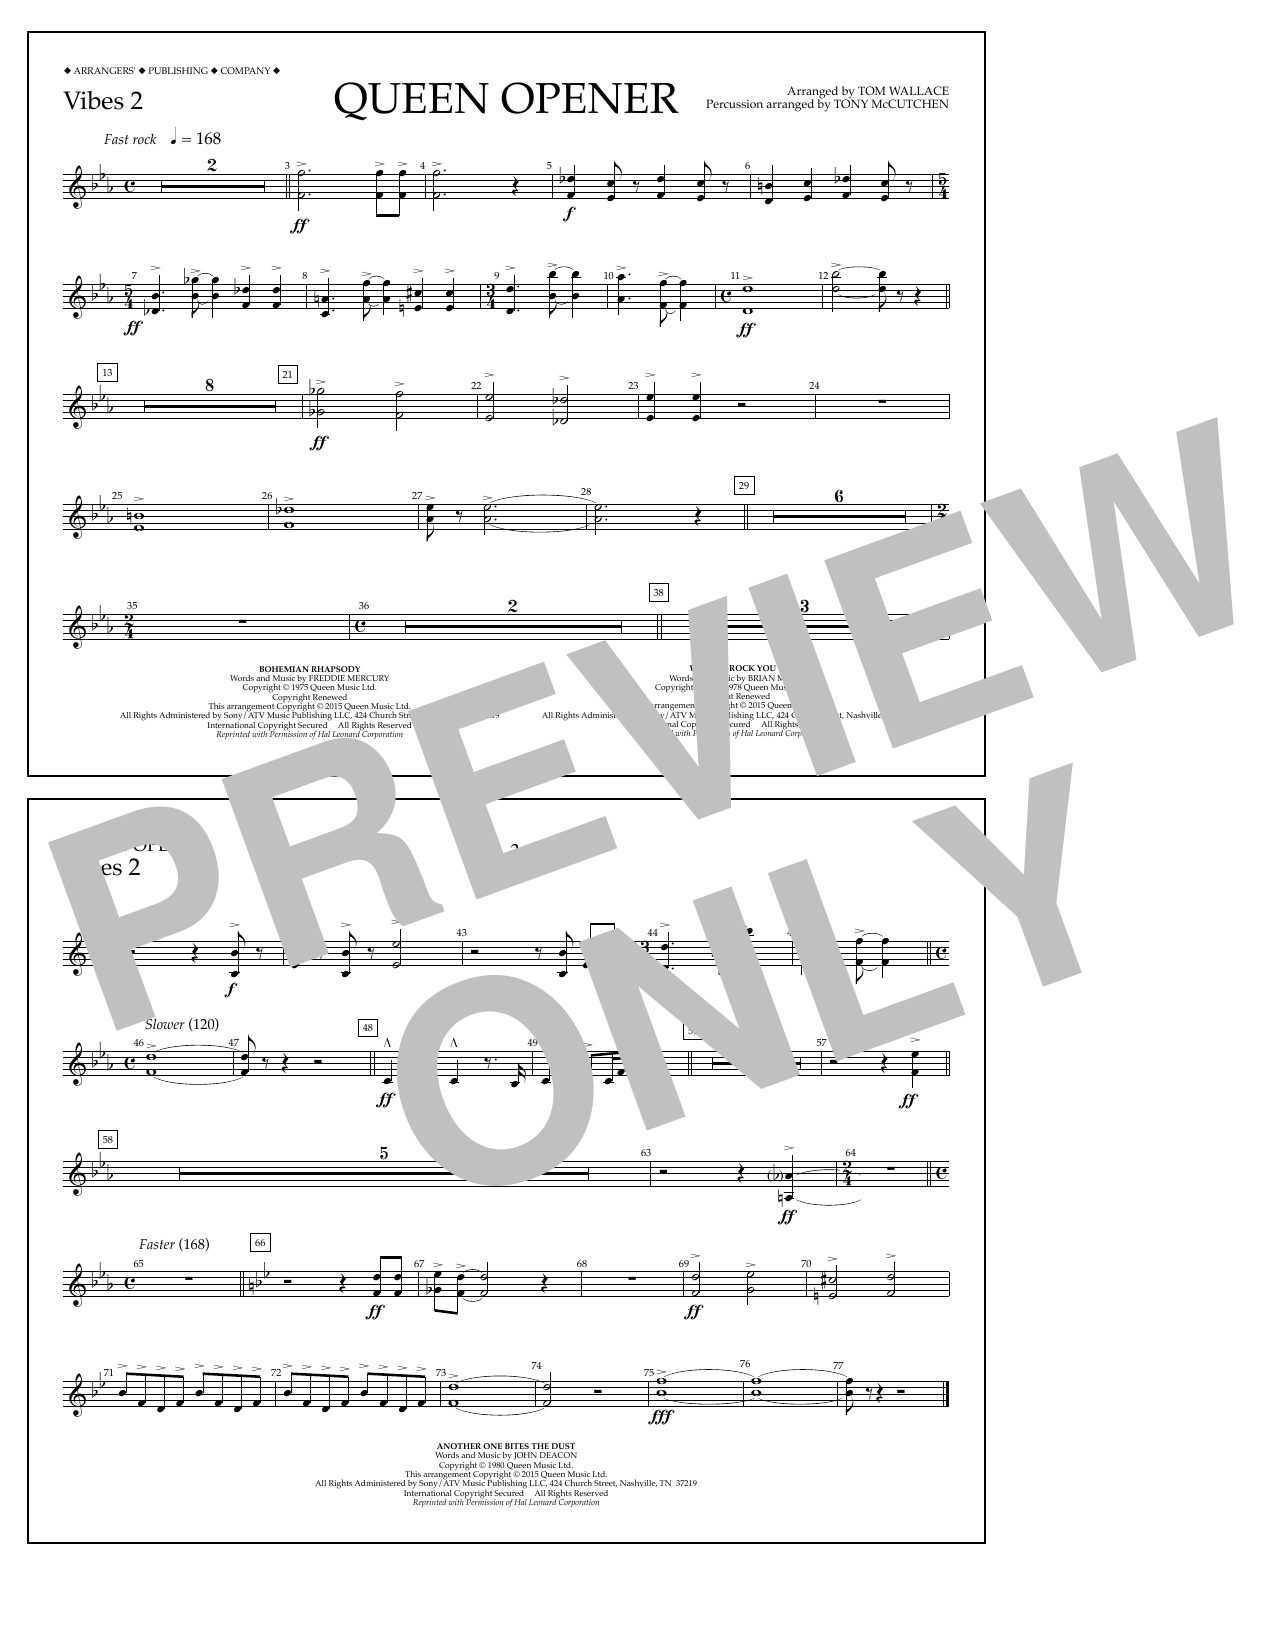 Download Tom Wallace Queen Opener - Vibes 2 Sheet Music